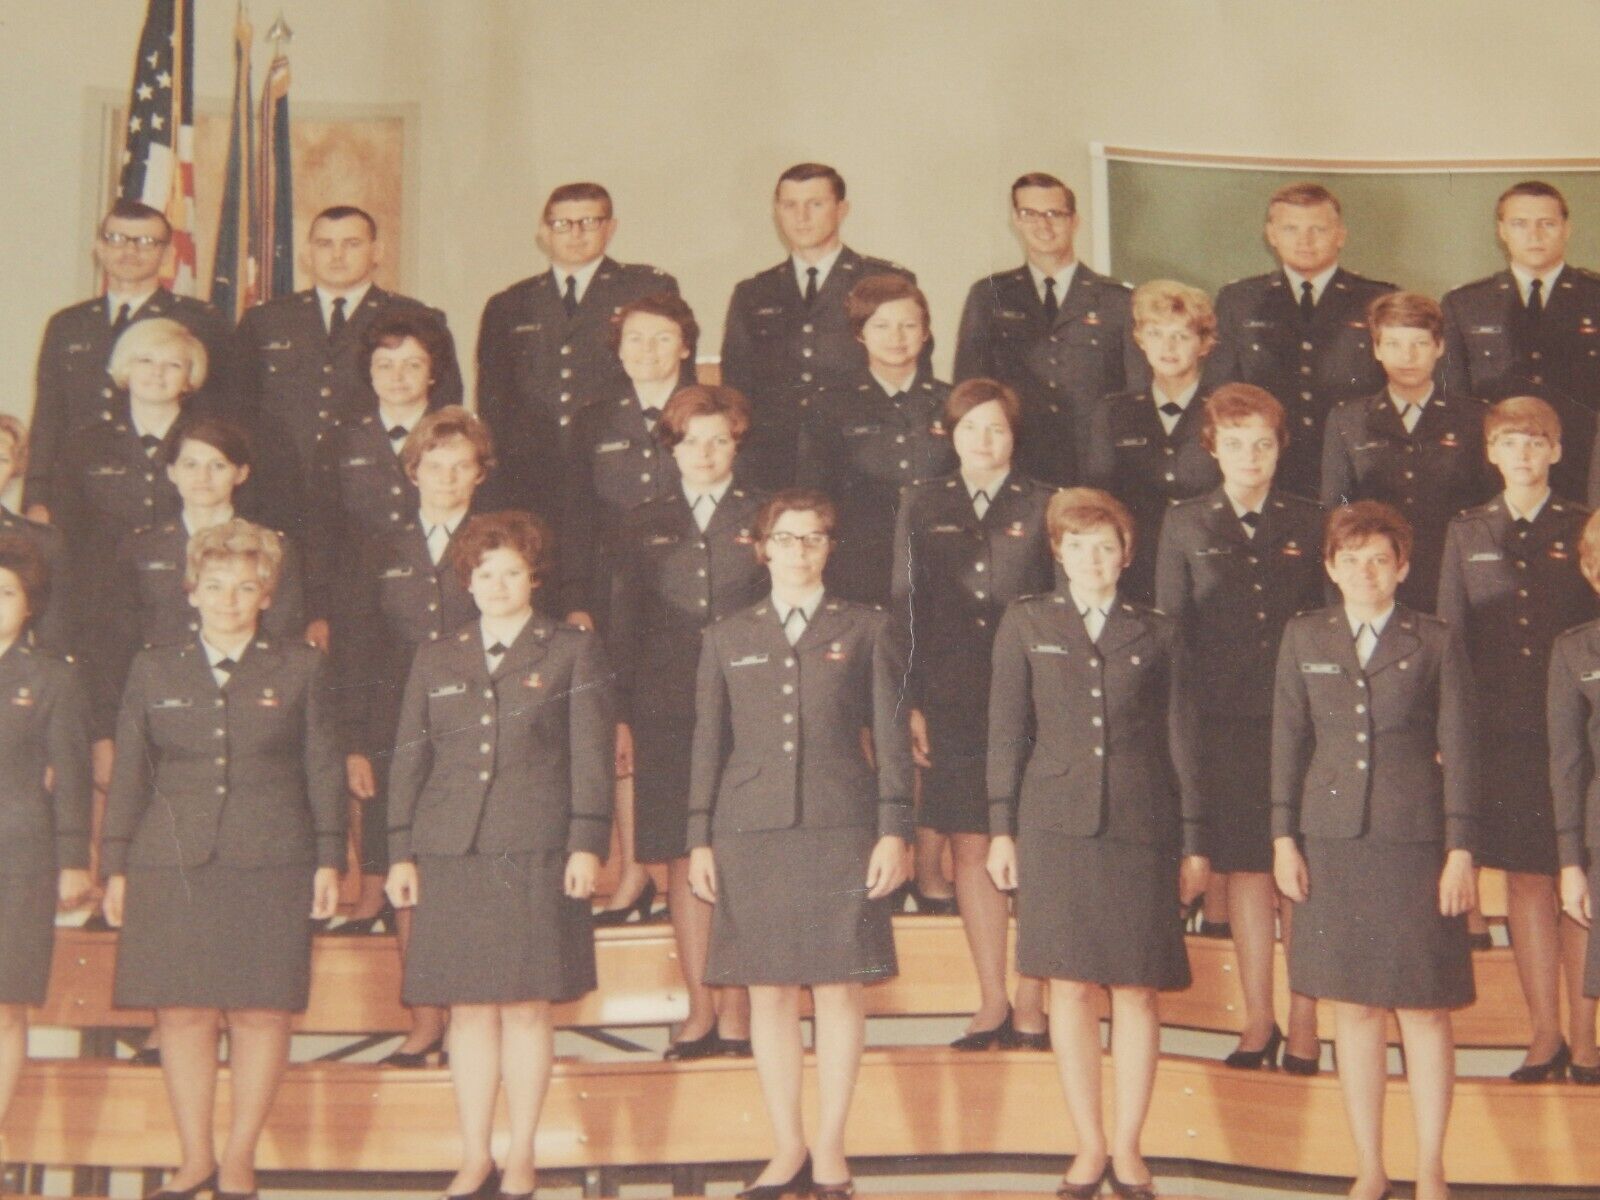 Vintage Photograph,1969,OFFICER BASIC MILITARY TRAINING CLASS PICTURE, Air Force